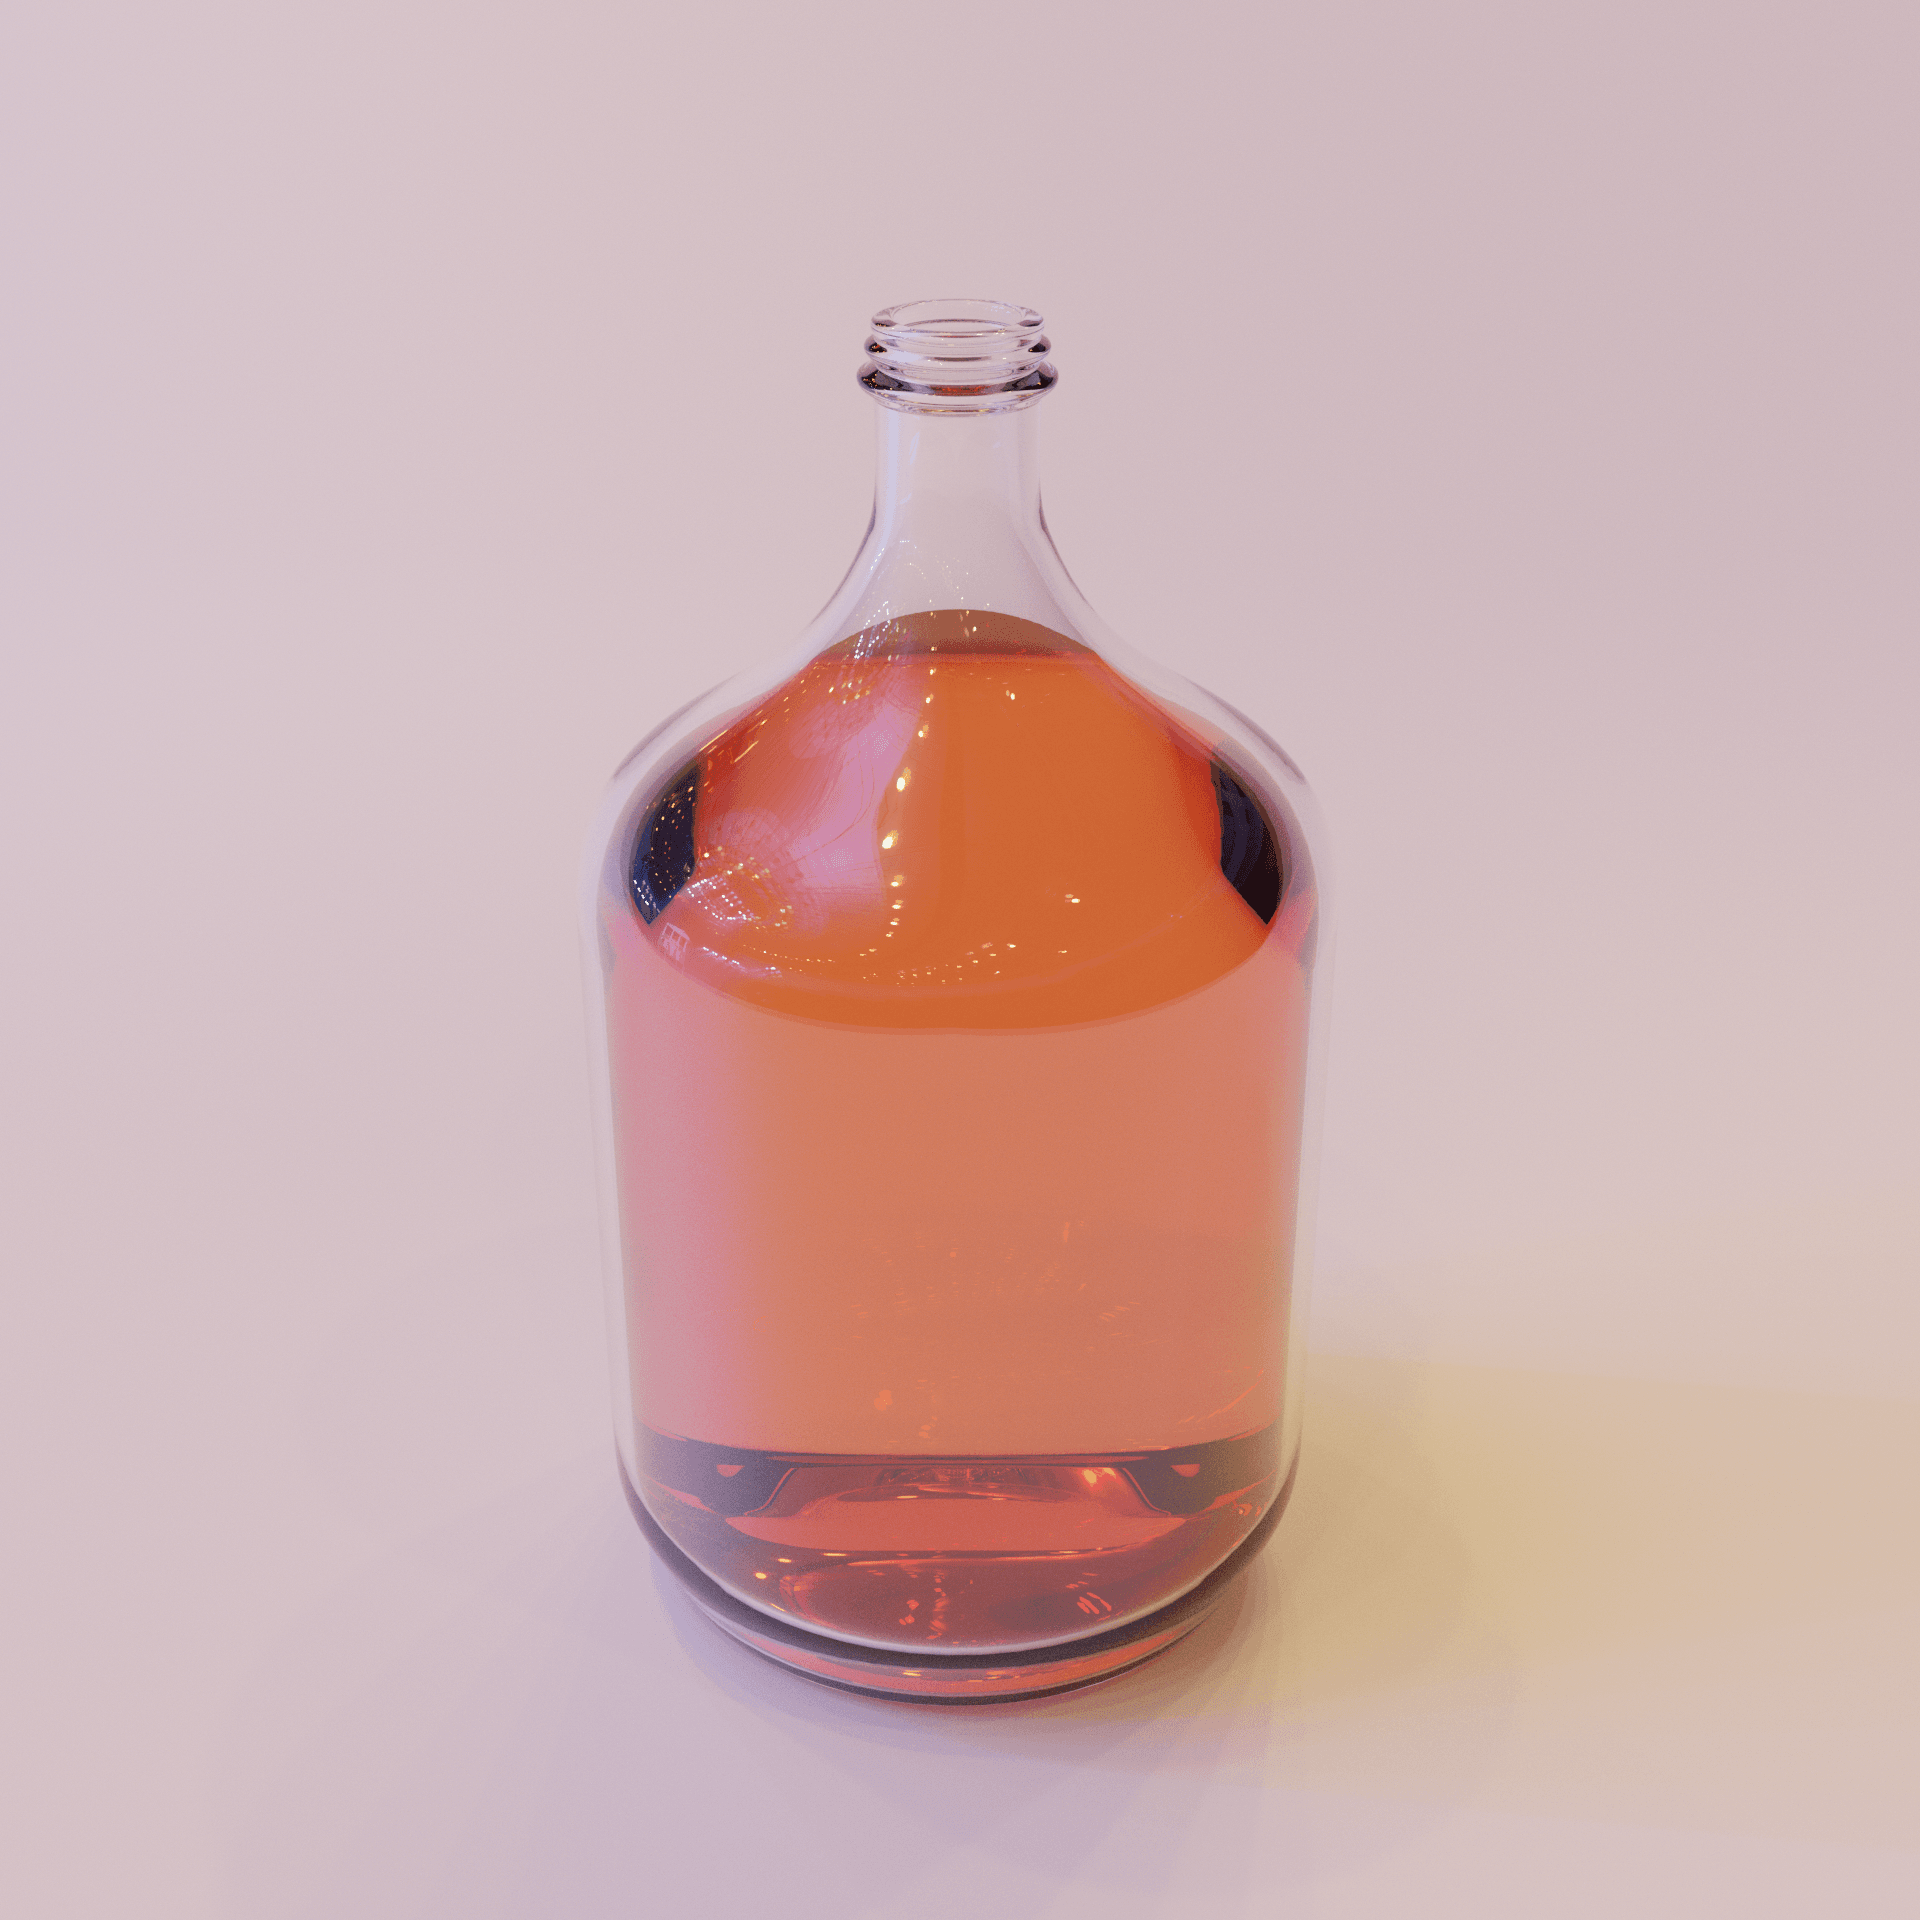 The Mystery Mead